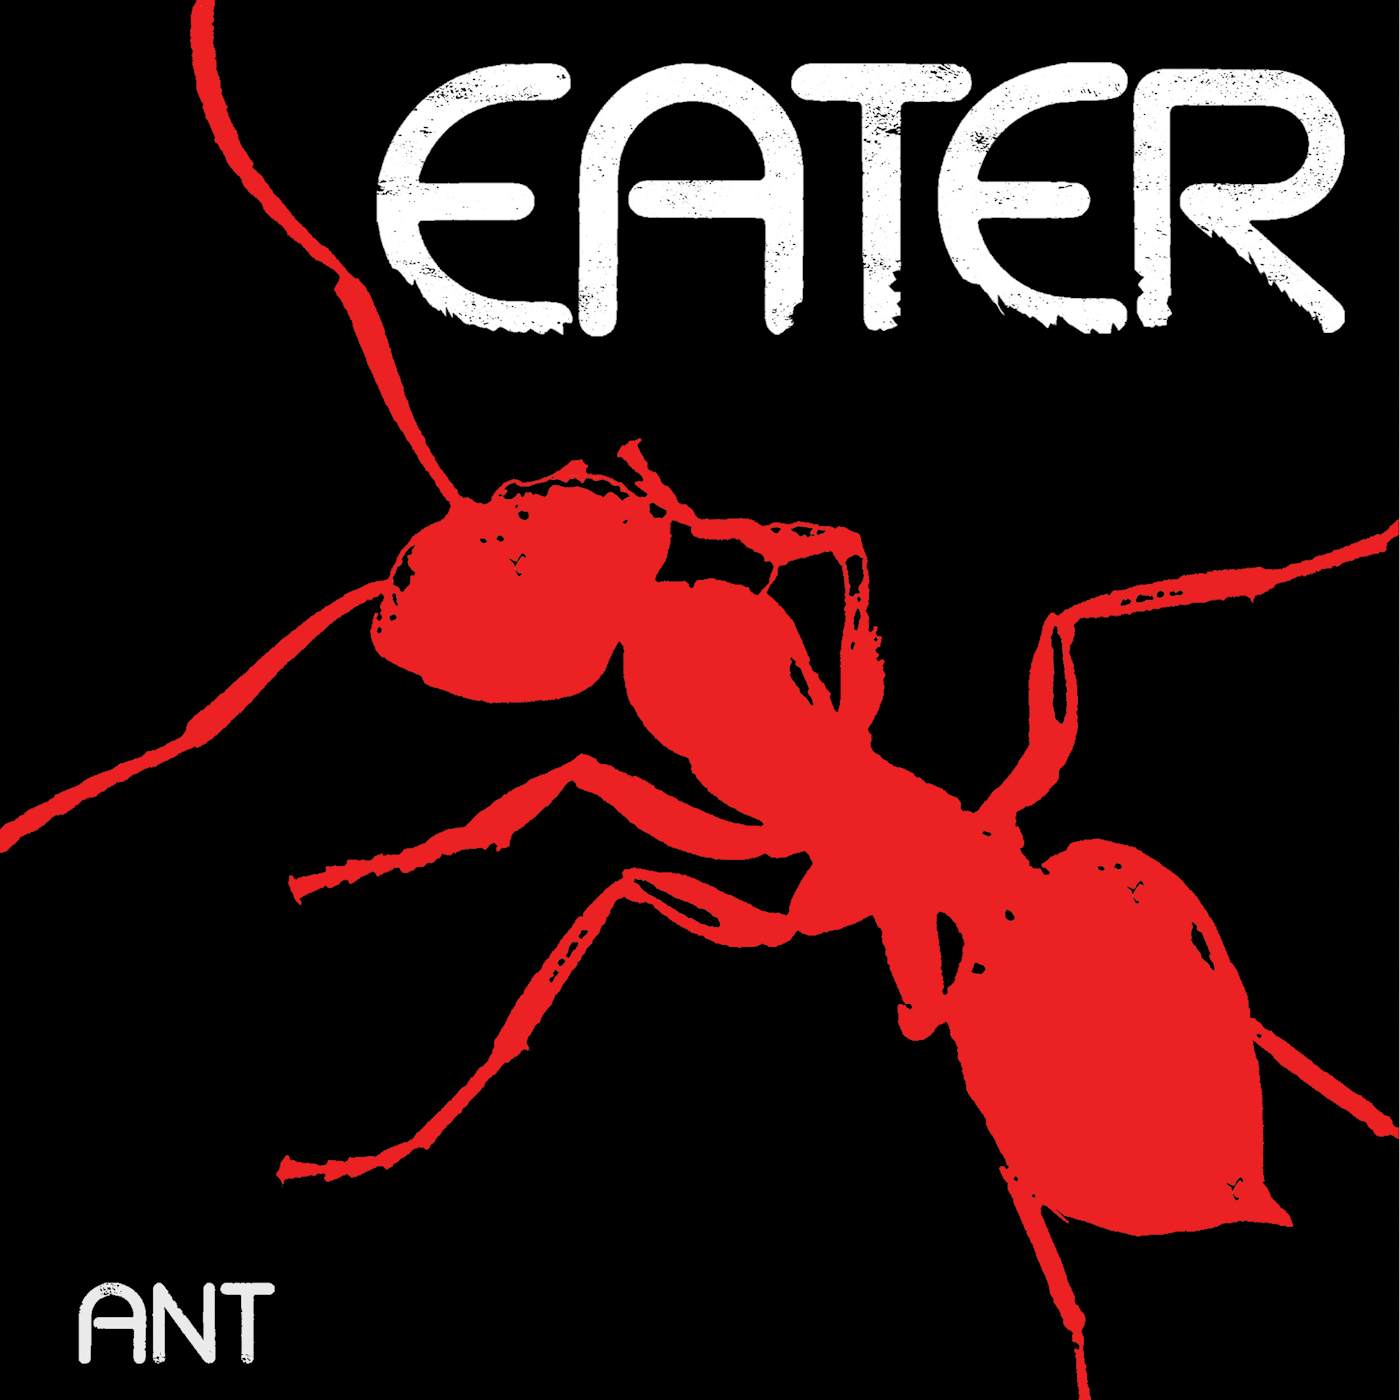 Eater Ant (Red) Vinyl Record